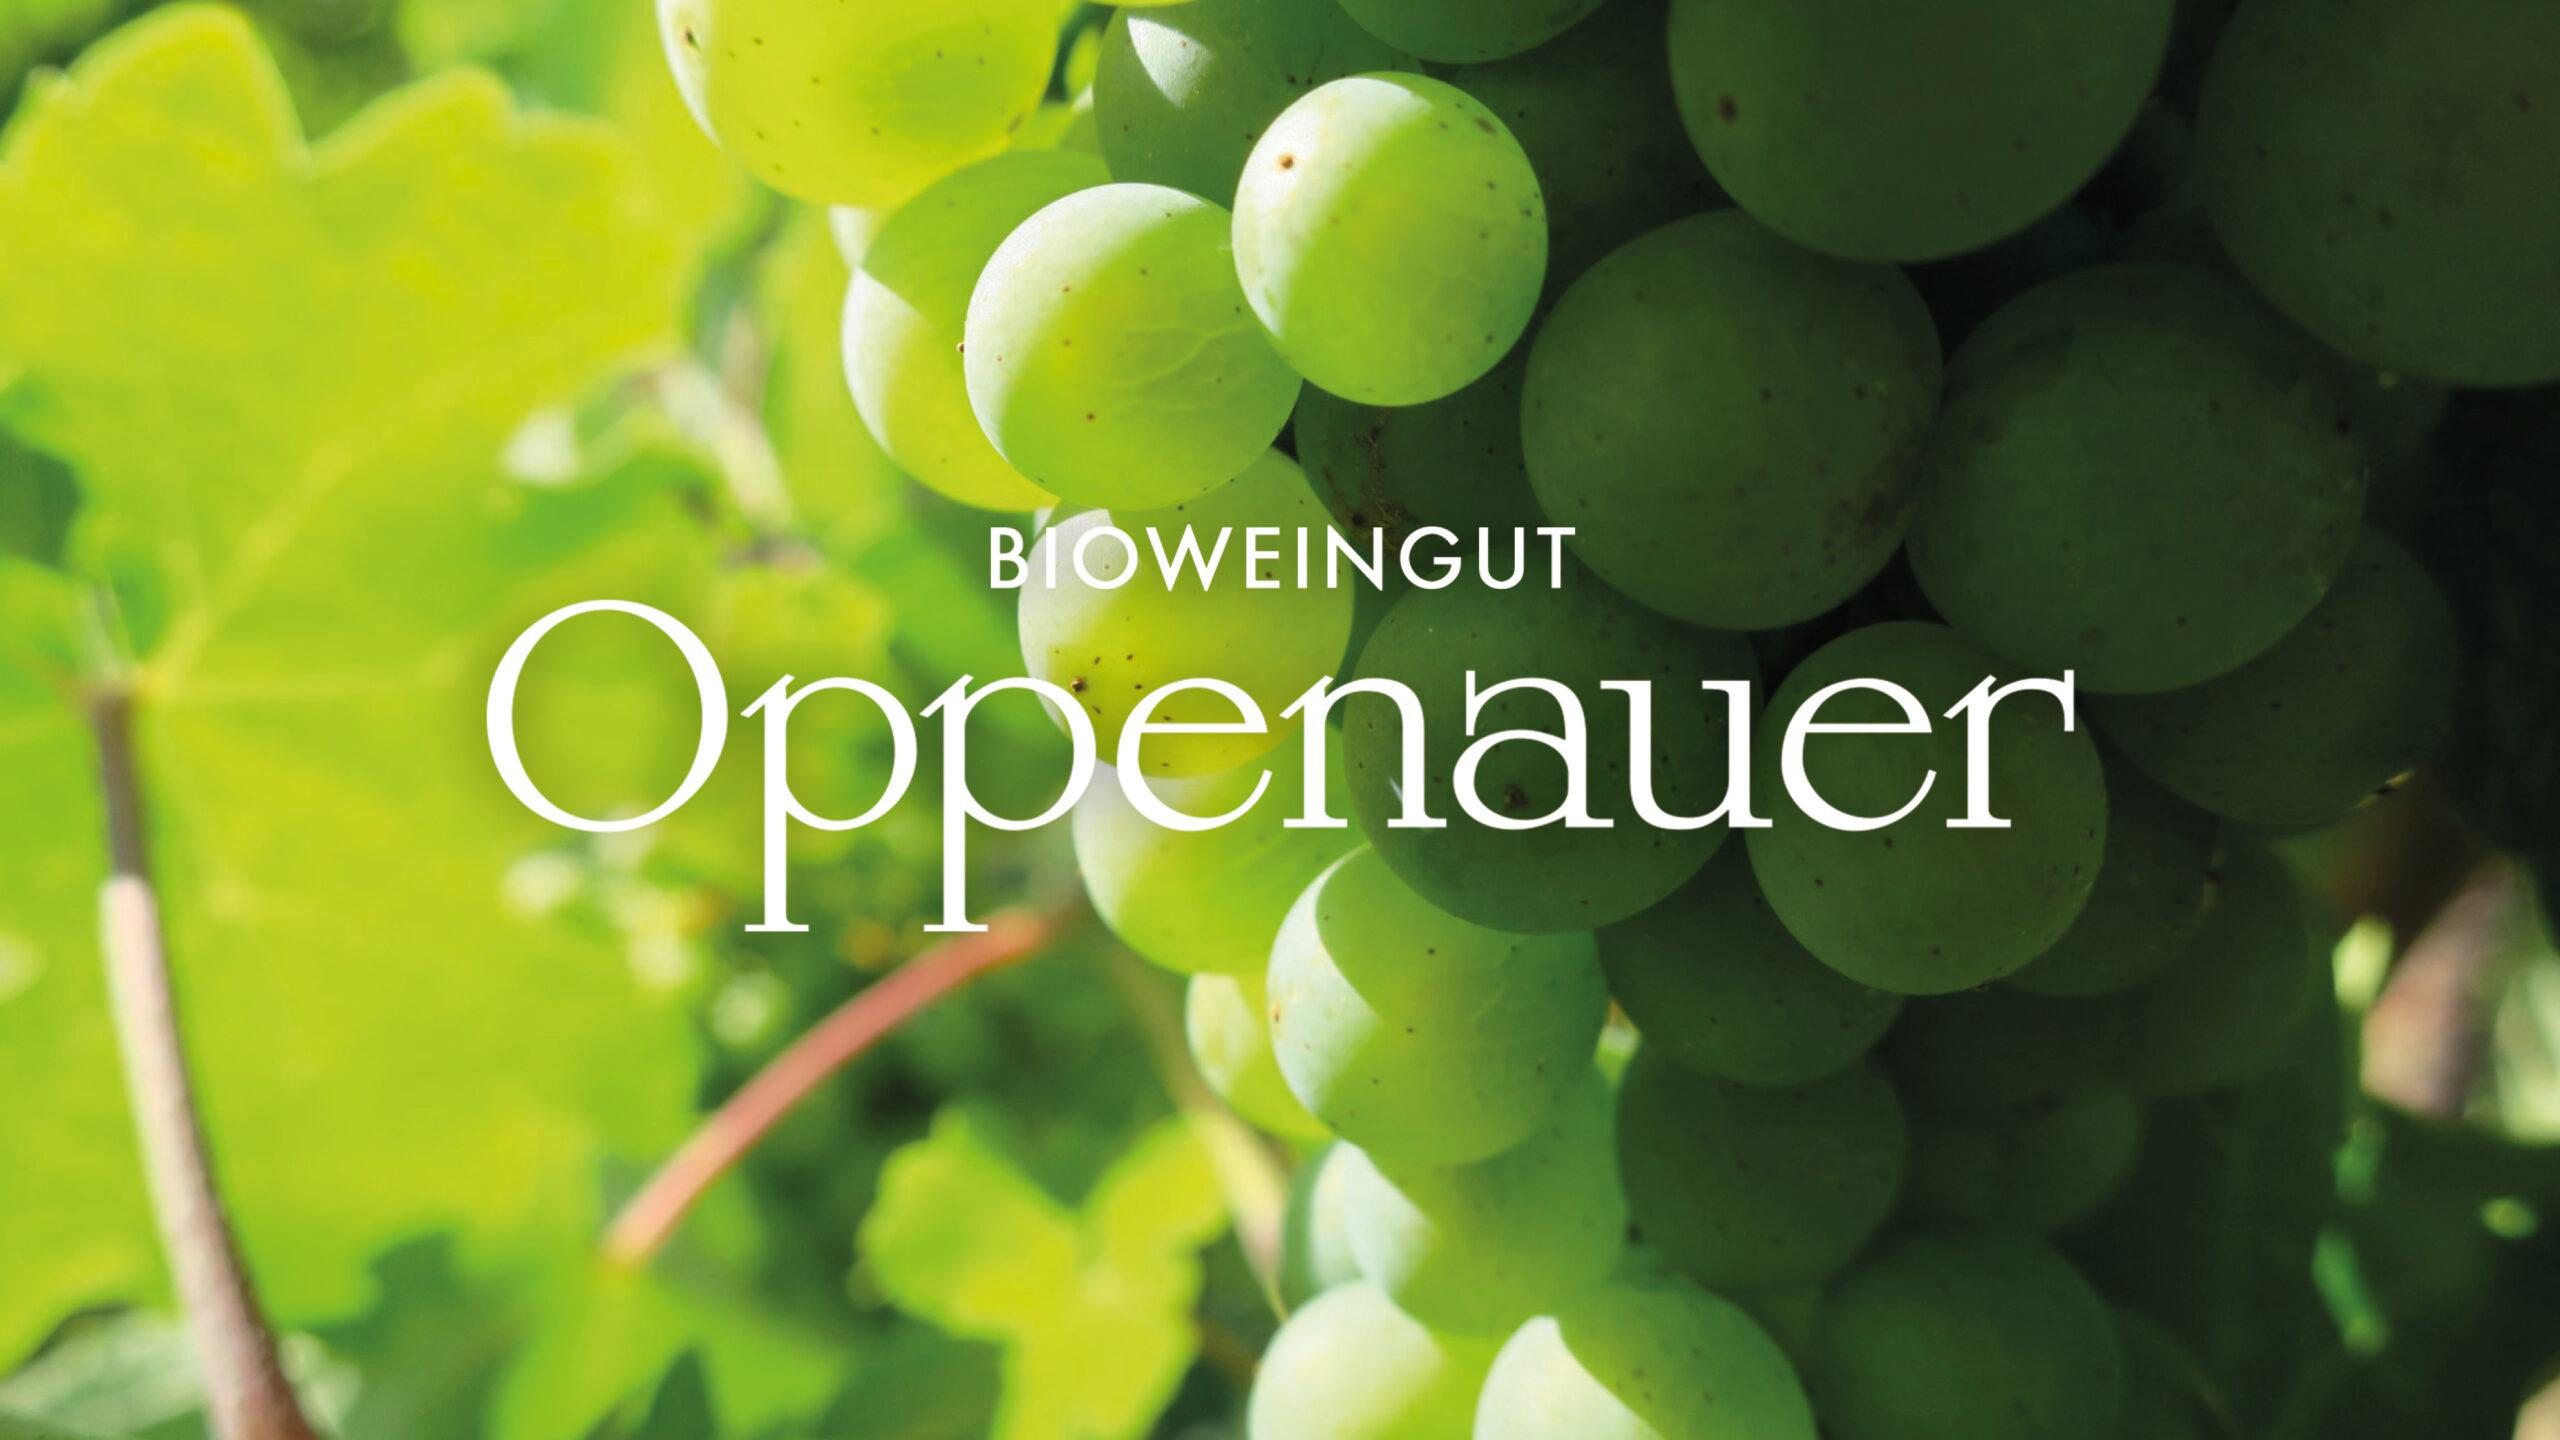 (c) Weingut-oppenauer.at